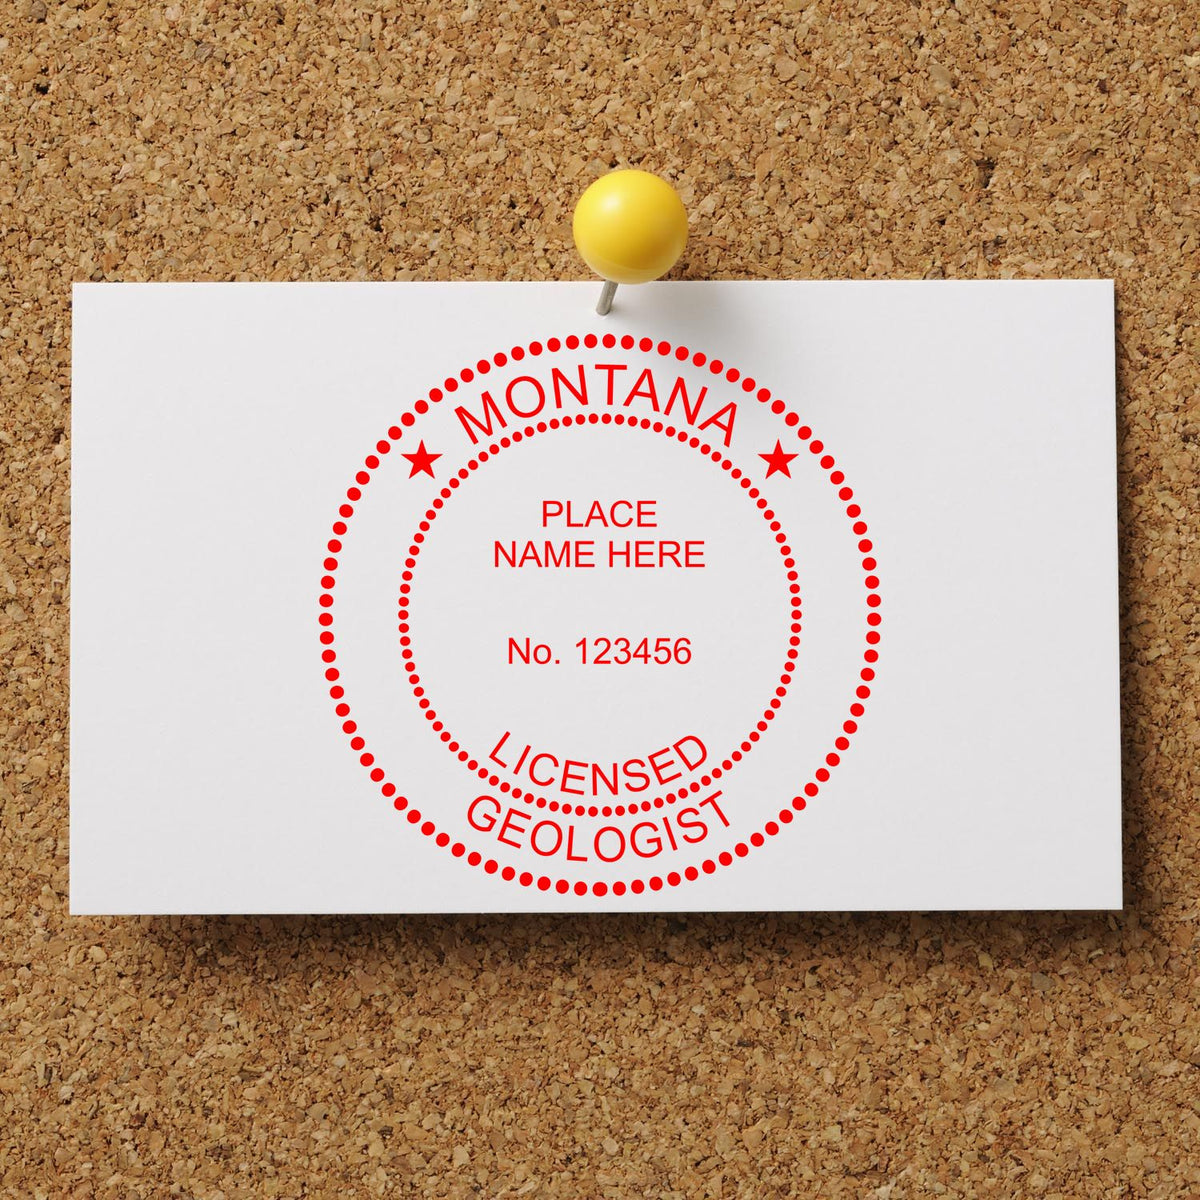 The Digital Montana Geologist Stamp, Electronic Seal for Montana Geologist stamp impression comes to life with a crisp, detailed image stamped on paper - showcasing true professional quality.